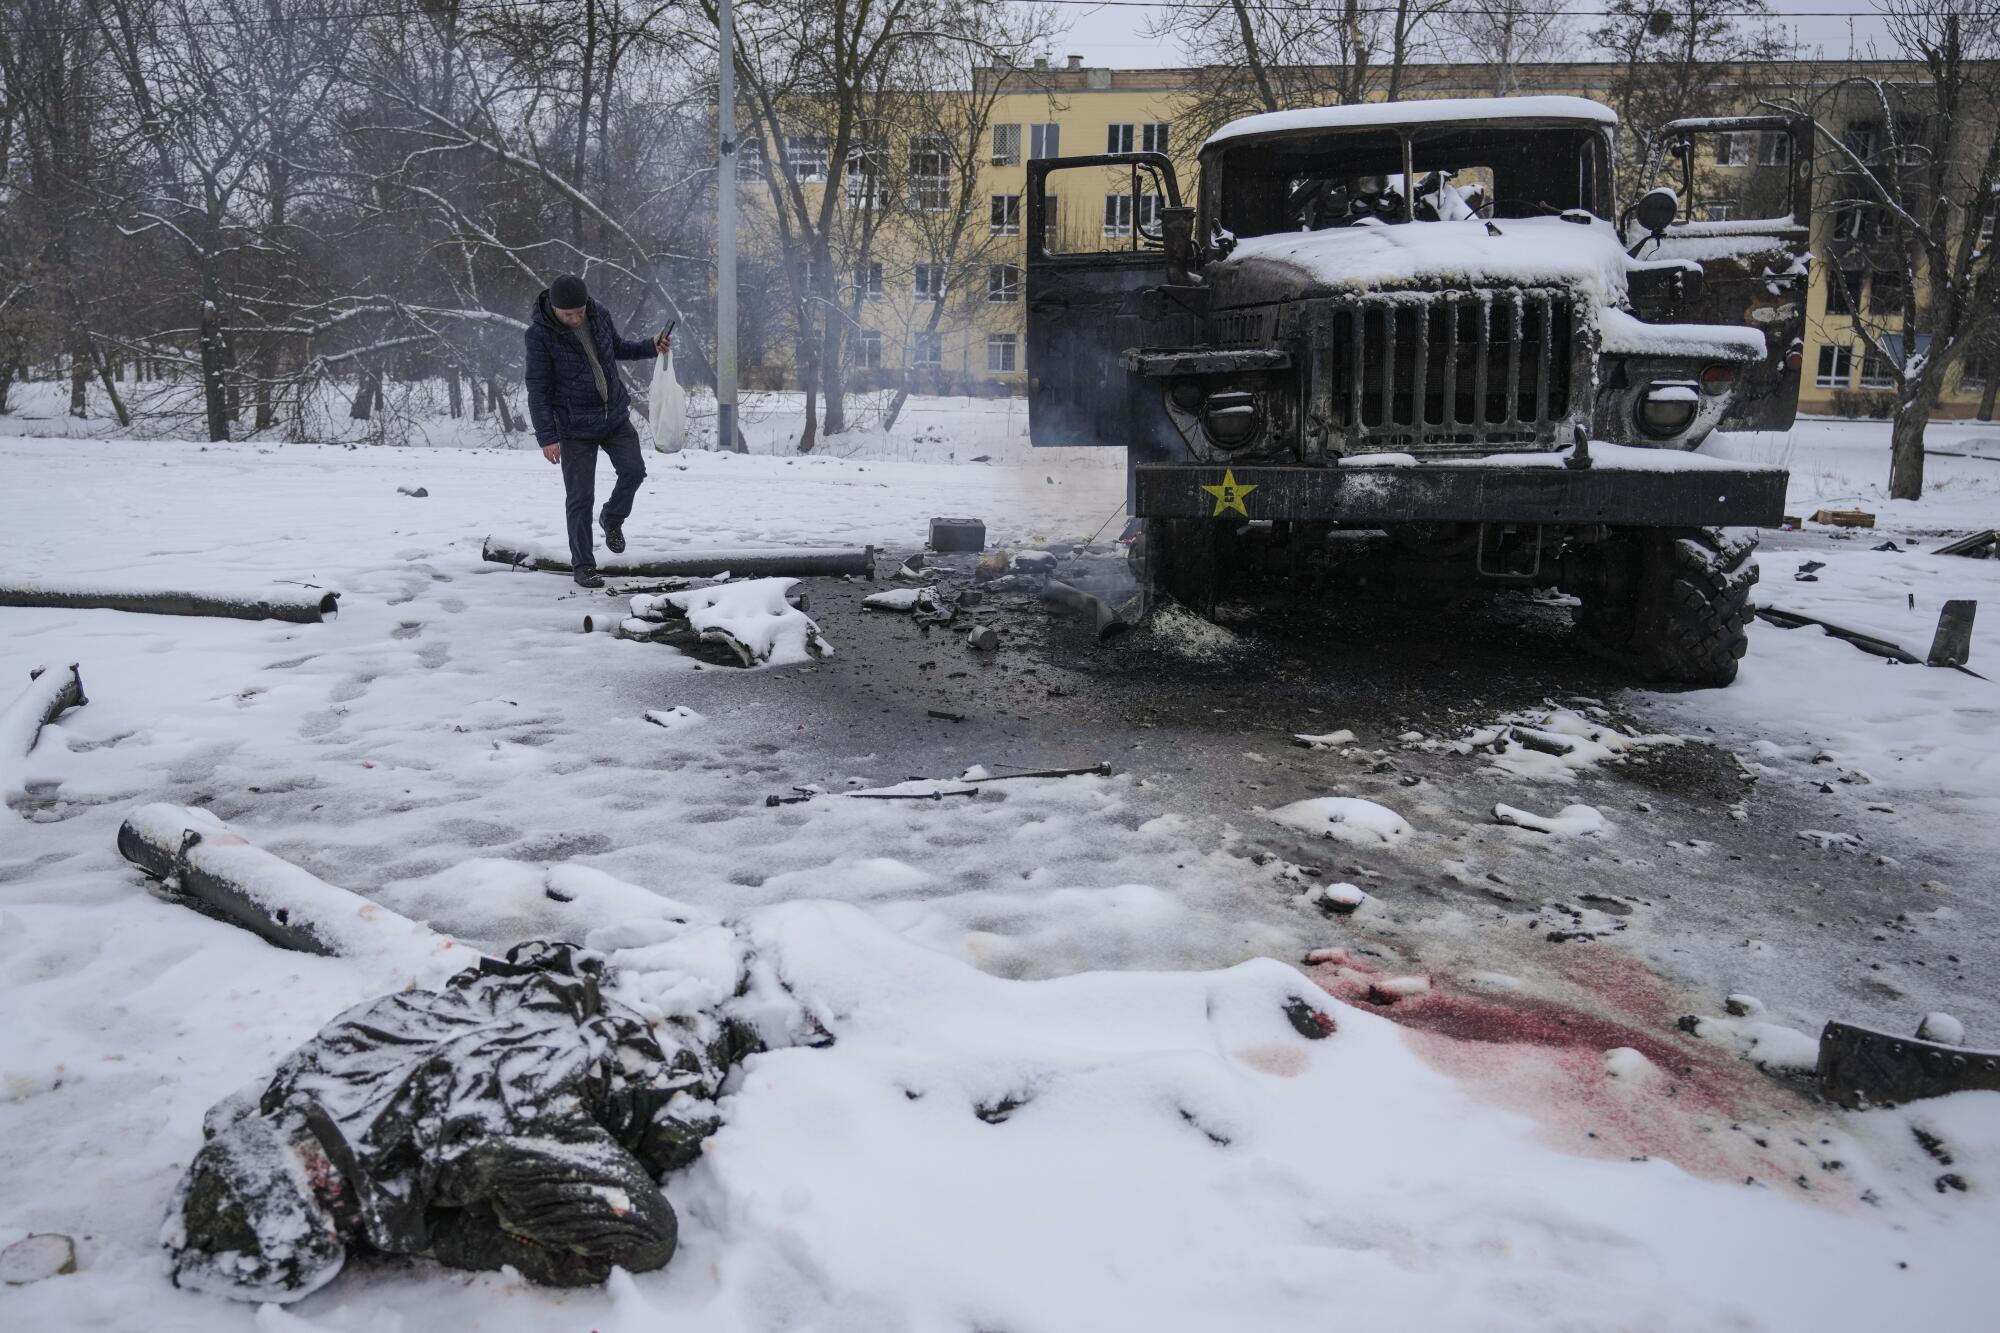 The body of a soldier in the snow near a military vehicle.